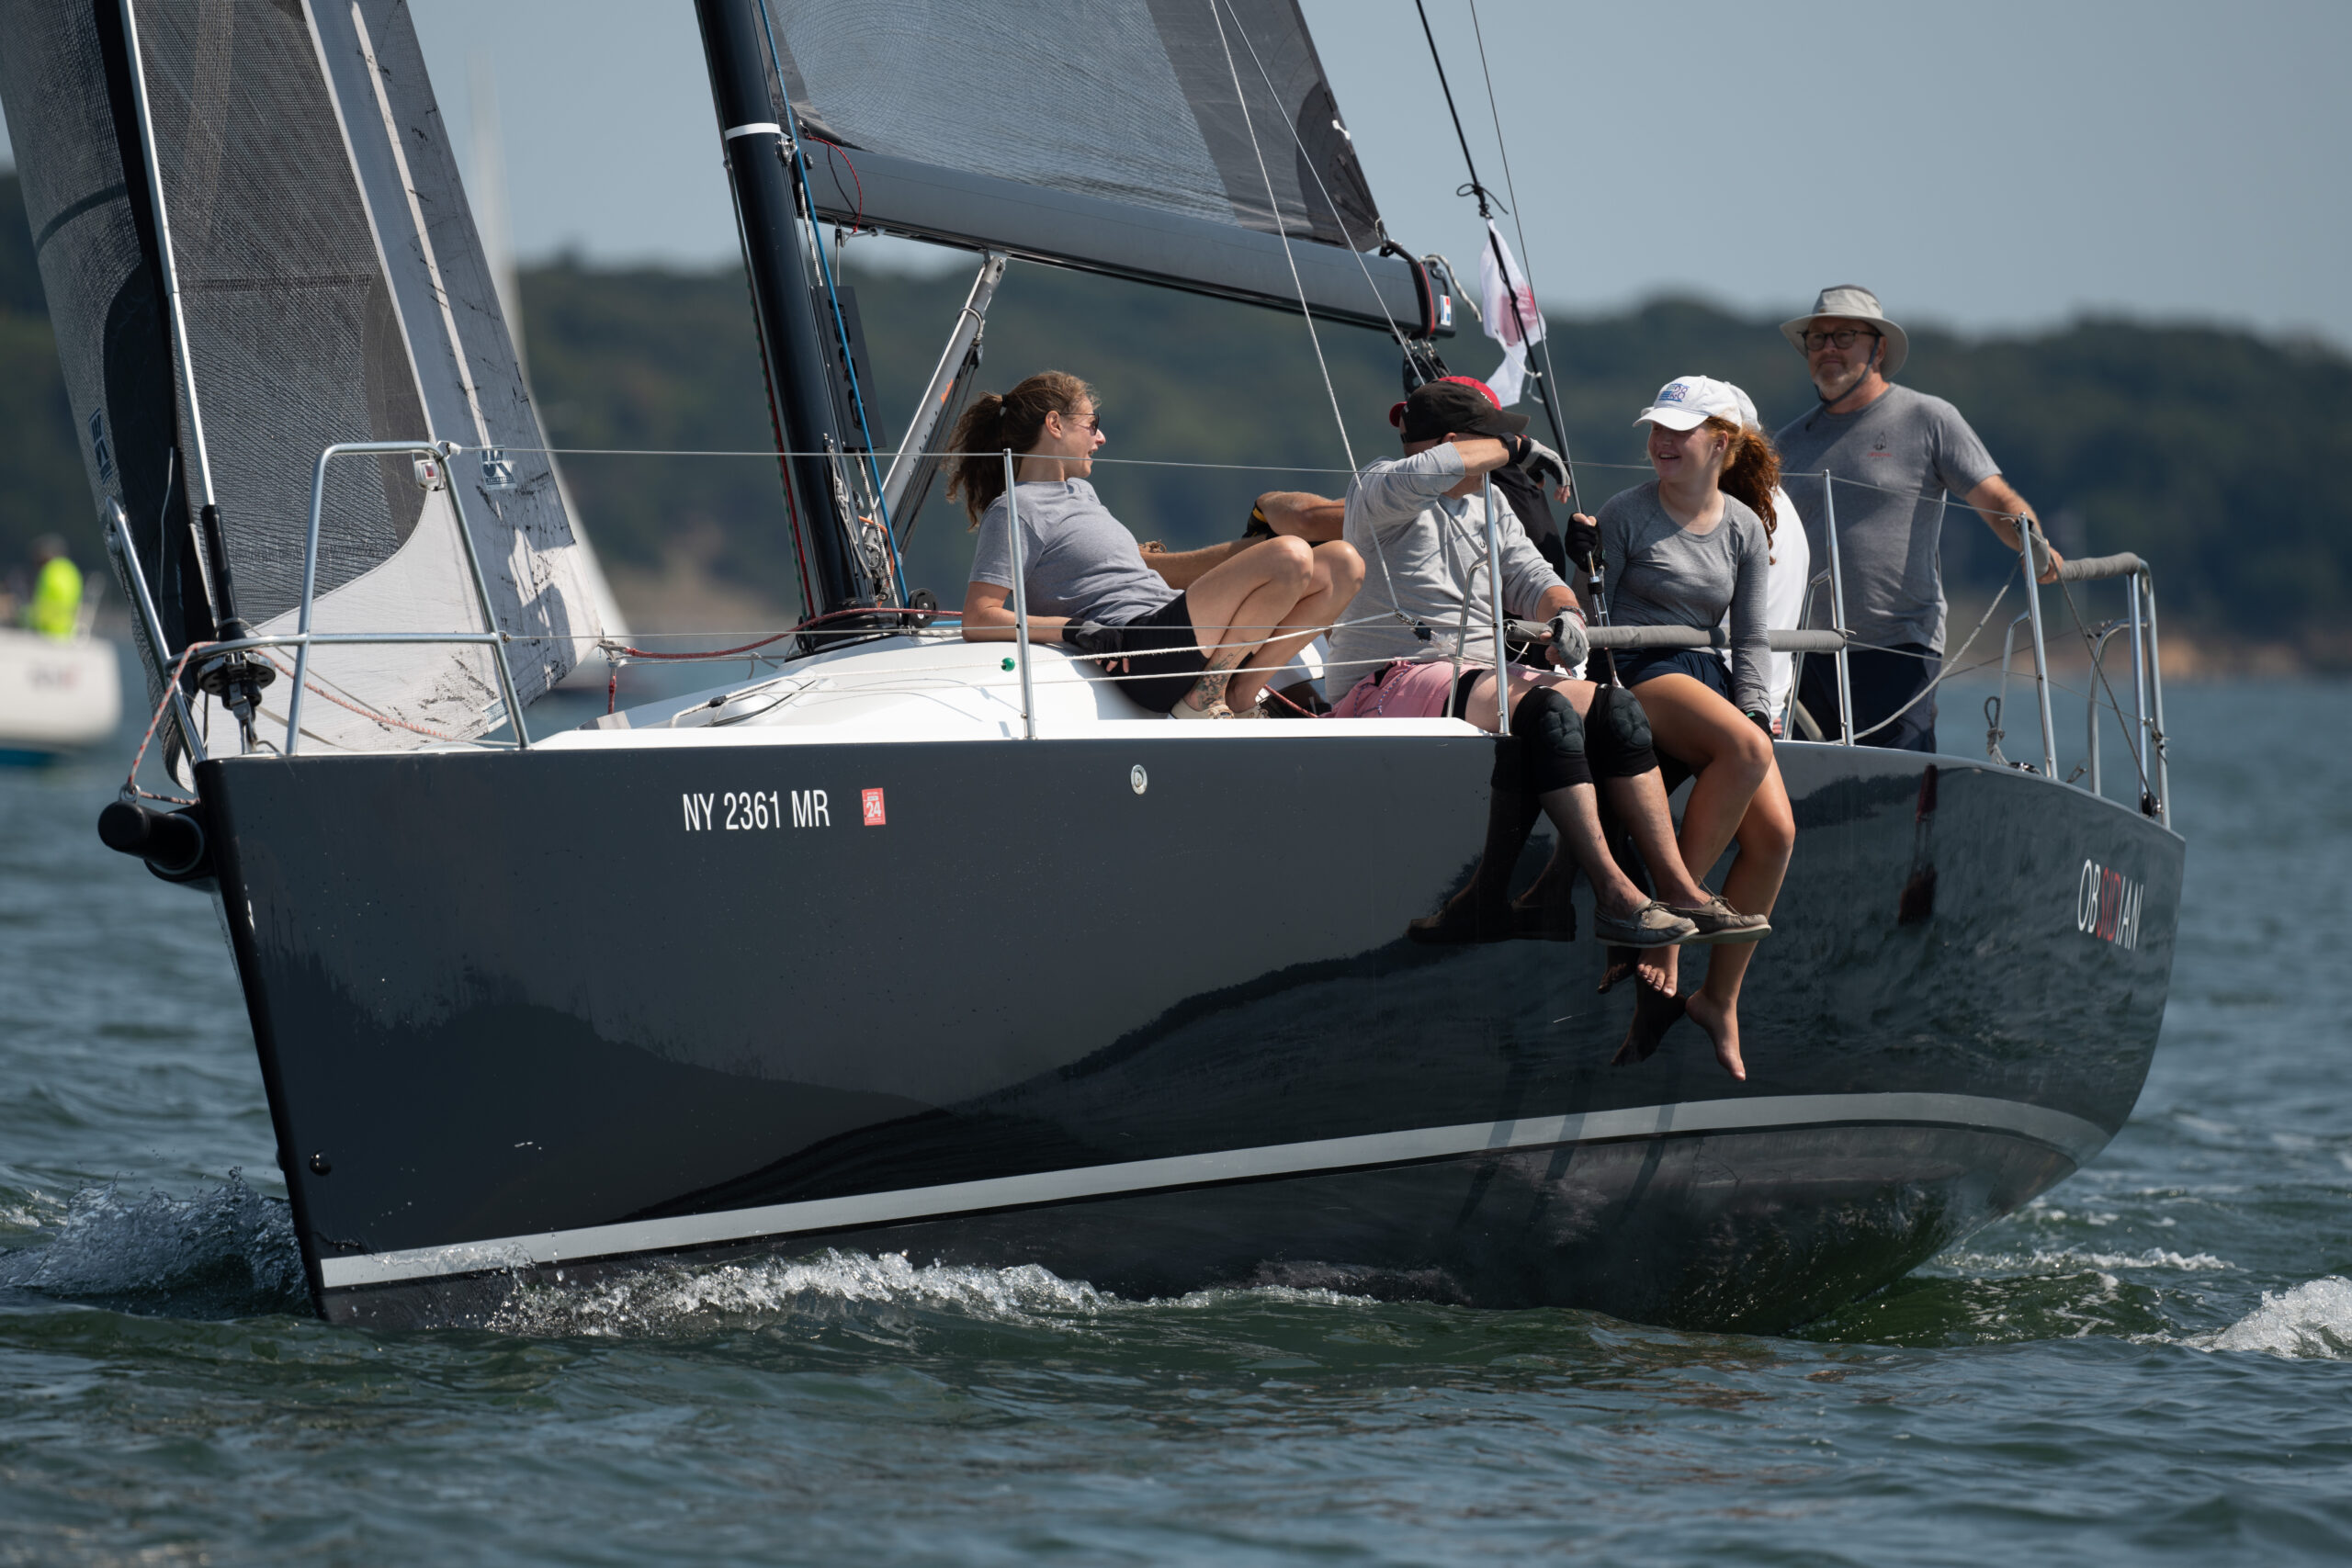 Members of Obsidian enjoy a nice day out on on the water for the 40th annual Sag Harbor Cup Regatta hosted by Breakwater Yacht Club.      GARY SENFT/EASTENDMARINEPHOTOGRAPHY.COM